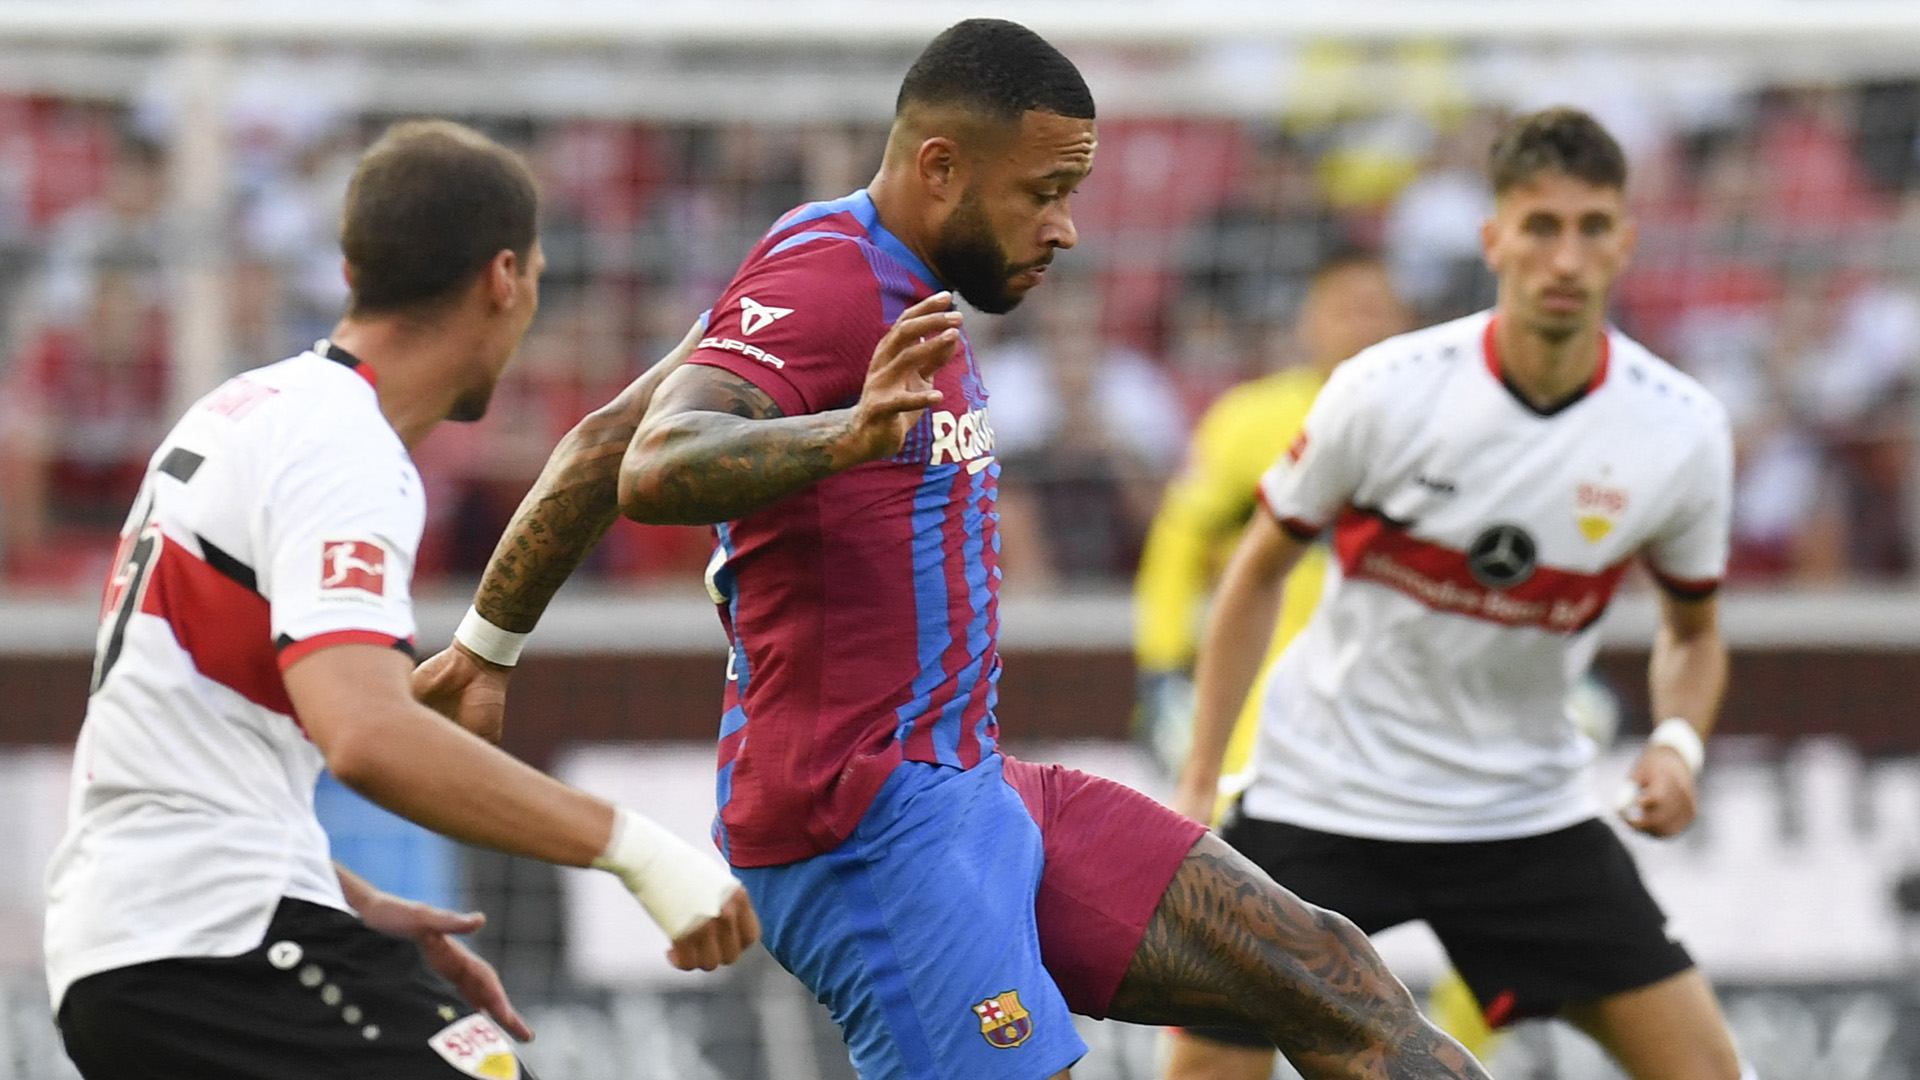 Video: Watch Depay score stunning goal for Barcelona in friendly clash with Stuttgart